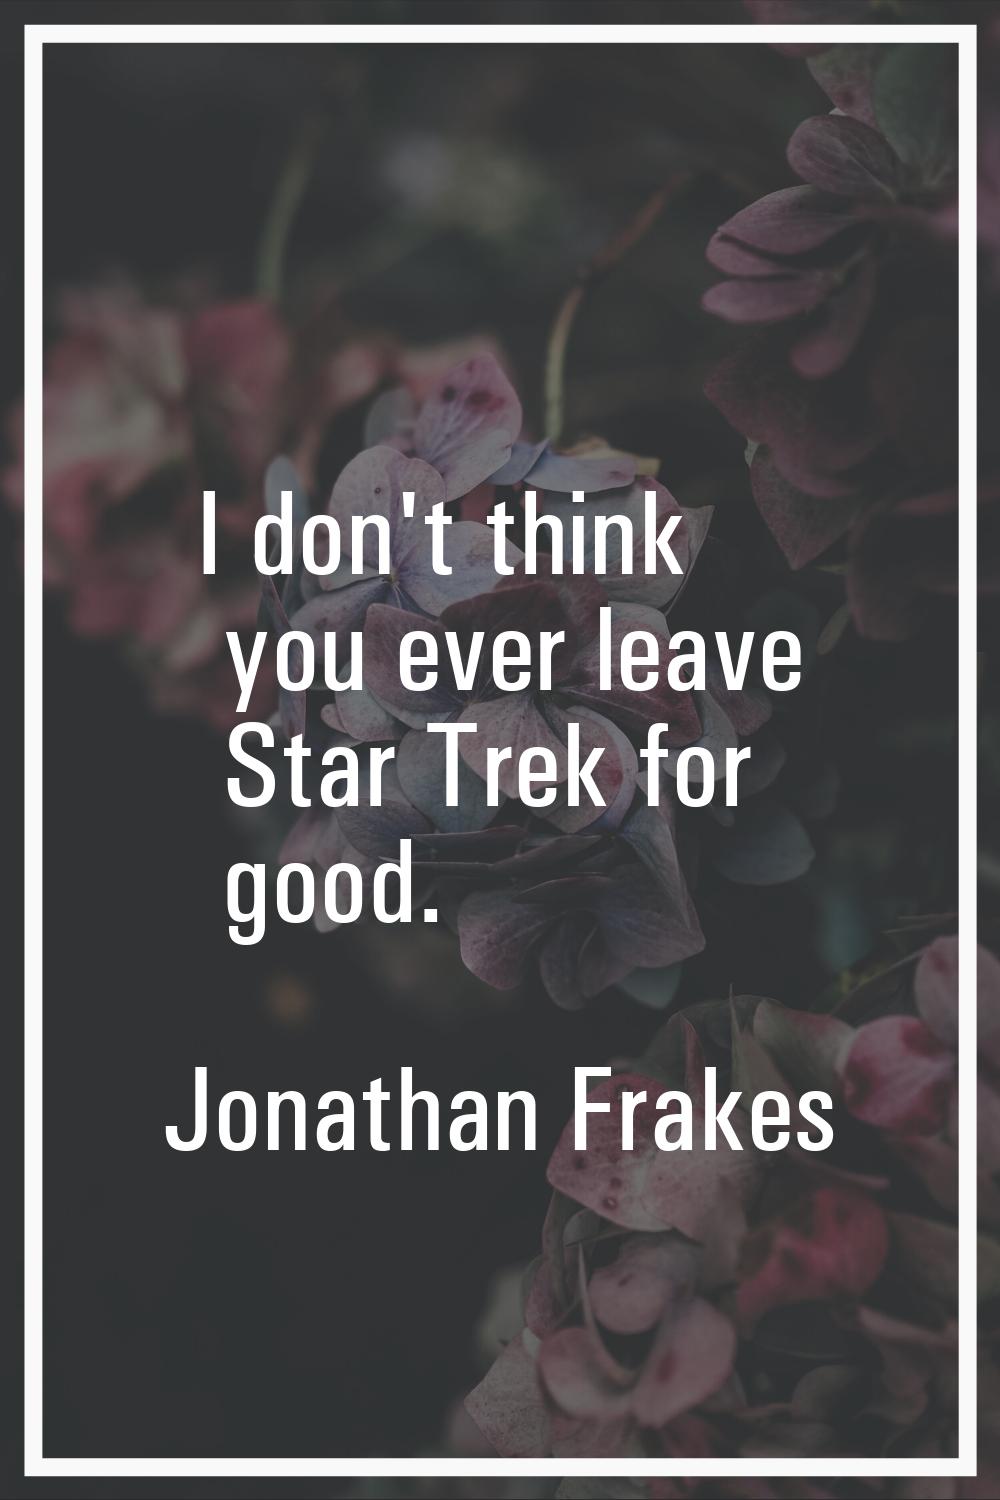 I don't think you ever leave Star Trek for good.